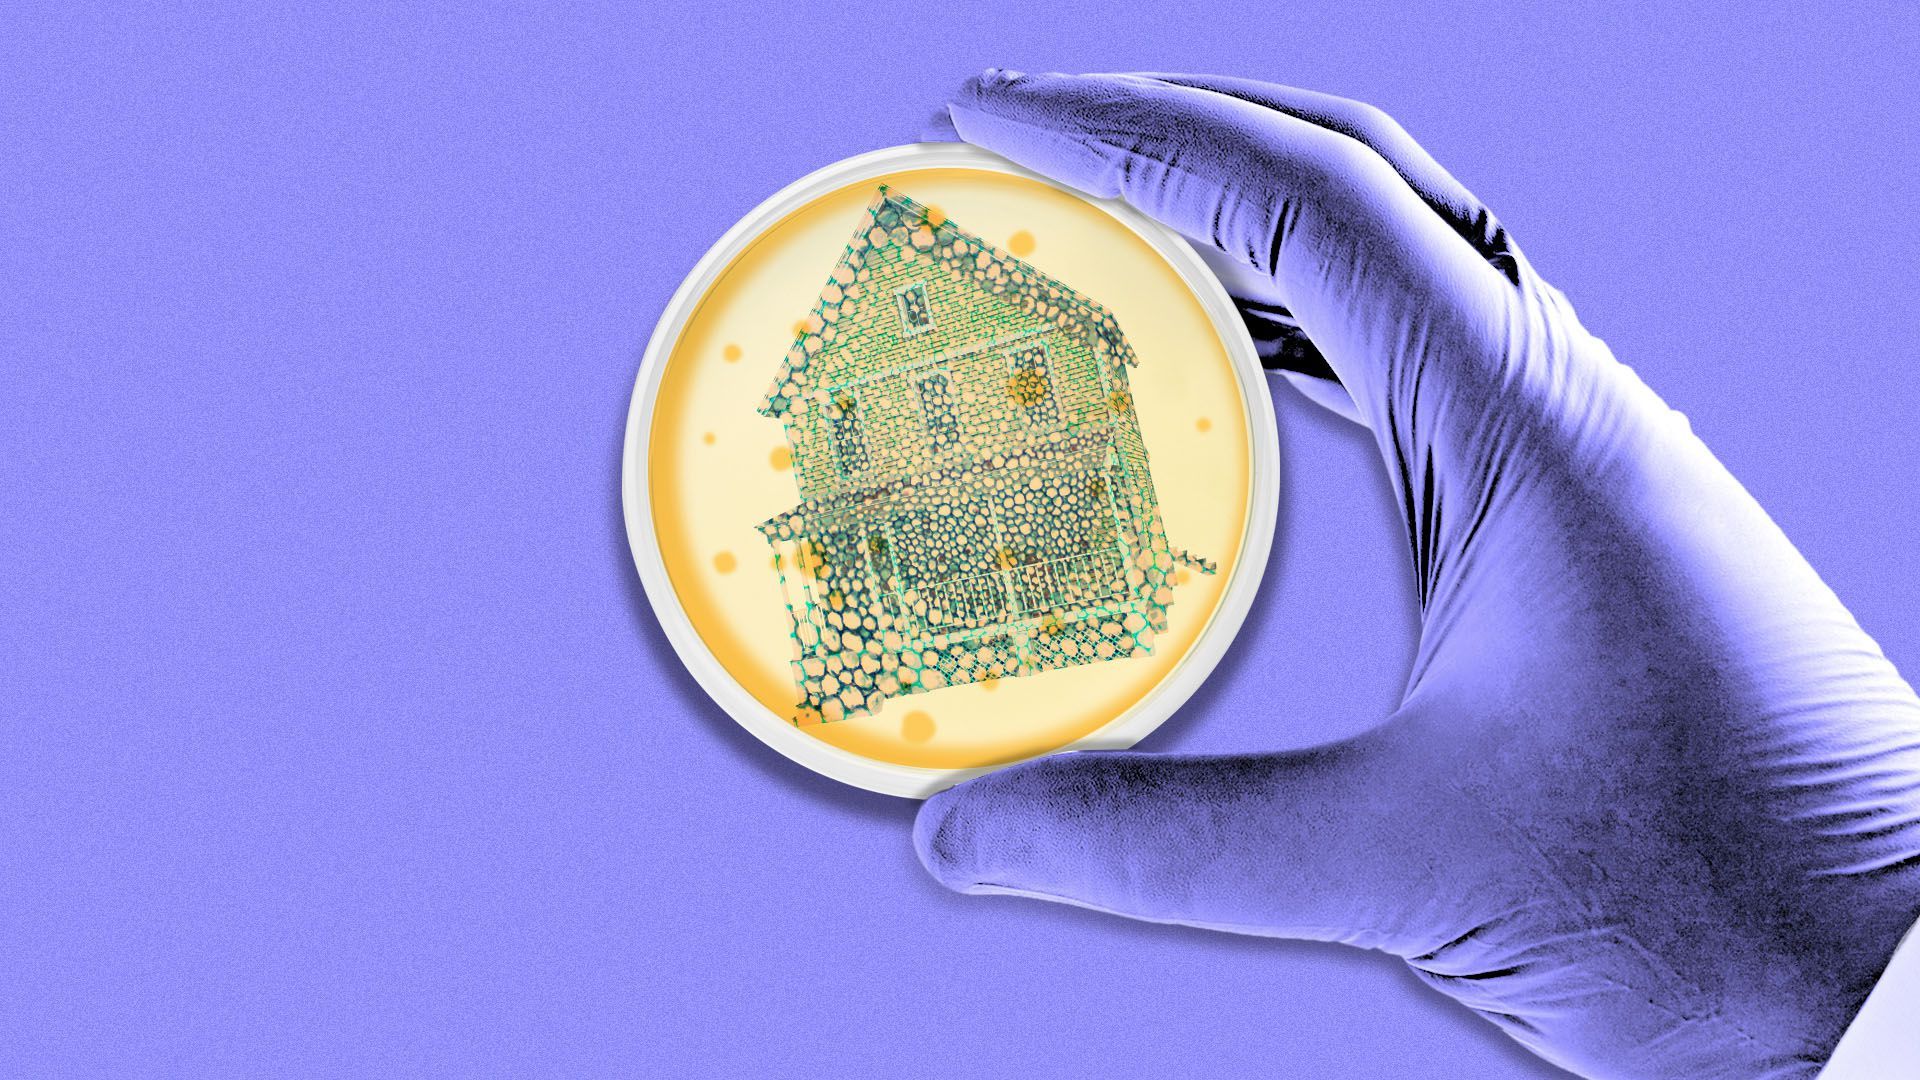 Illustration of a hand holding a petri dish with cells in the shape of a house